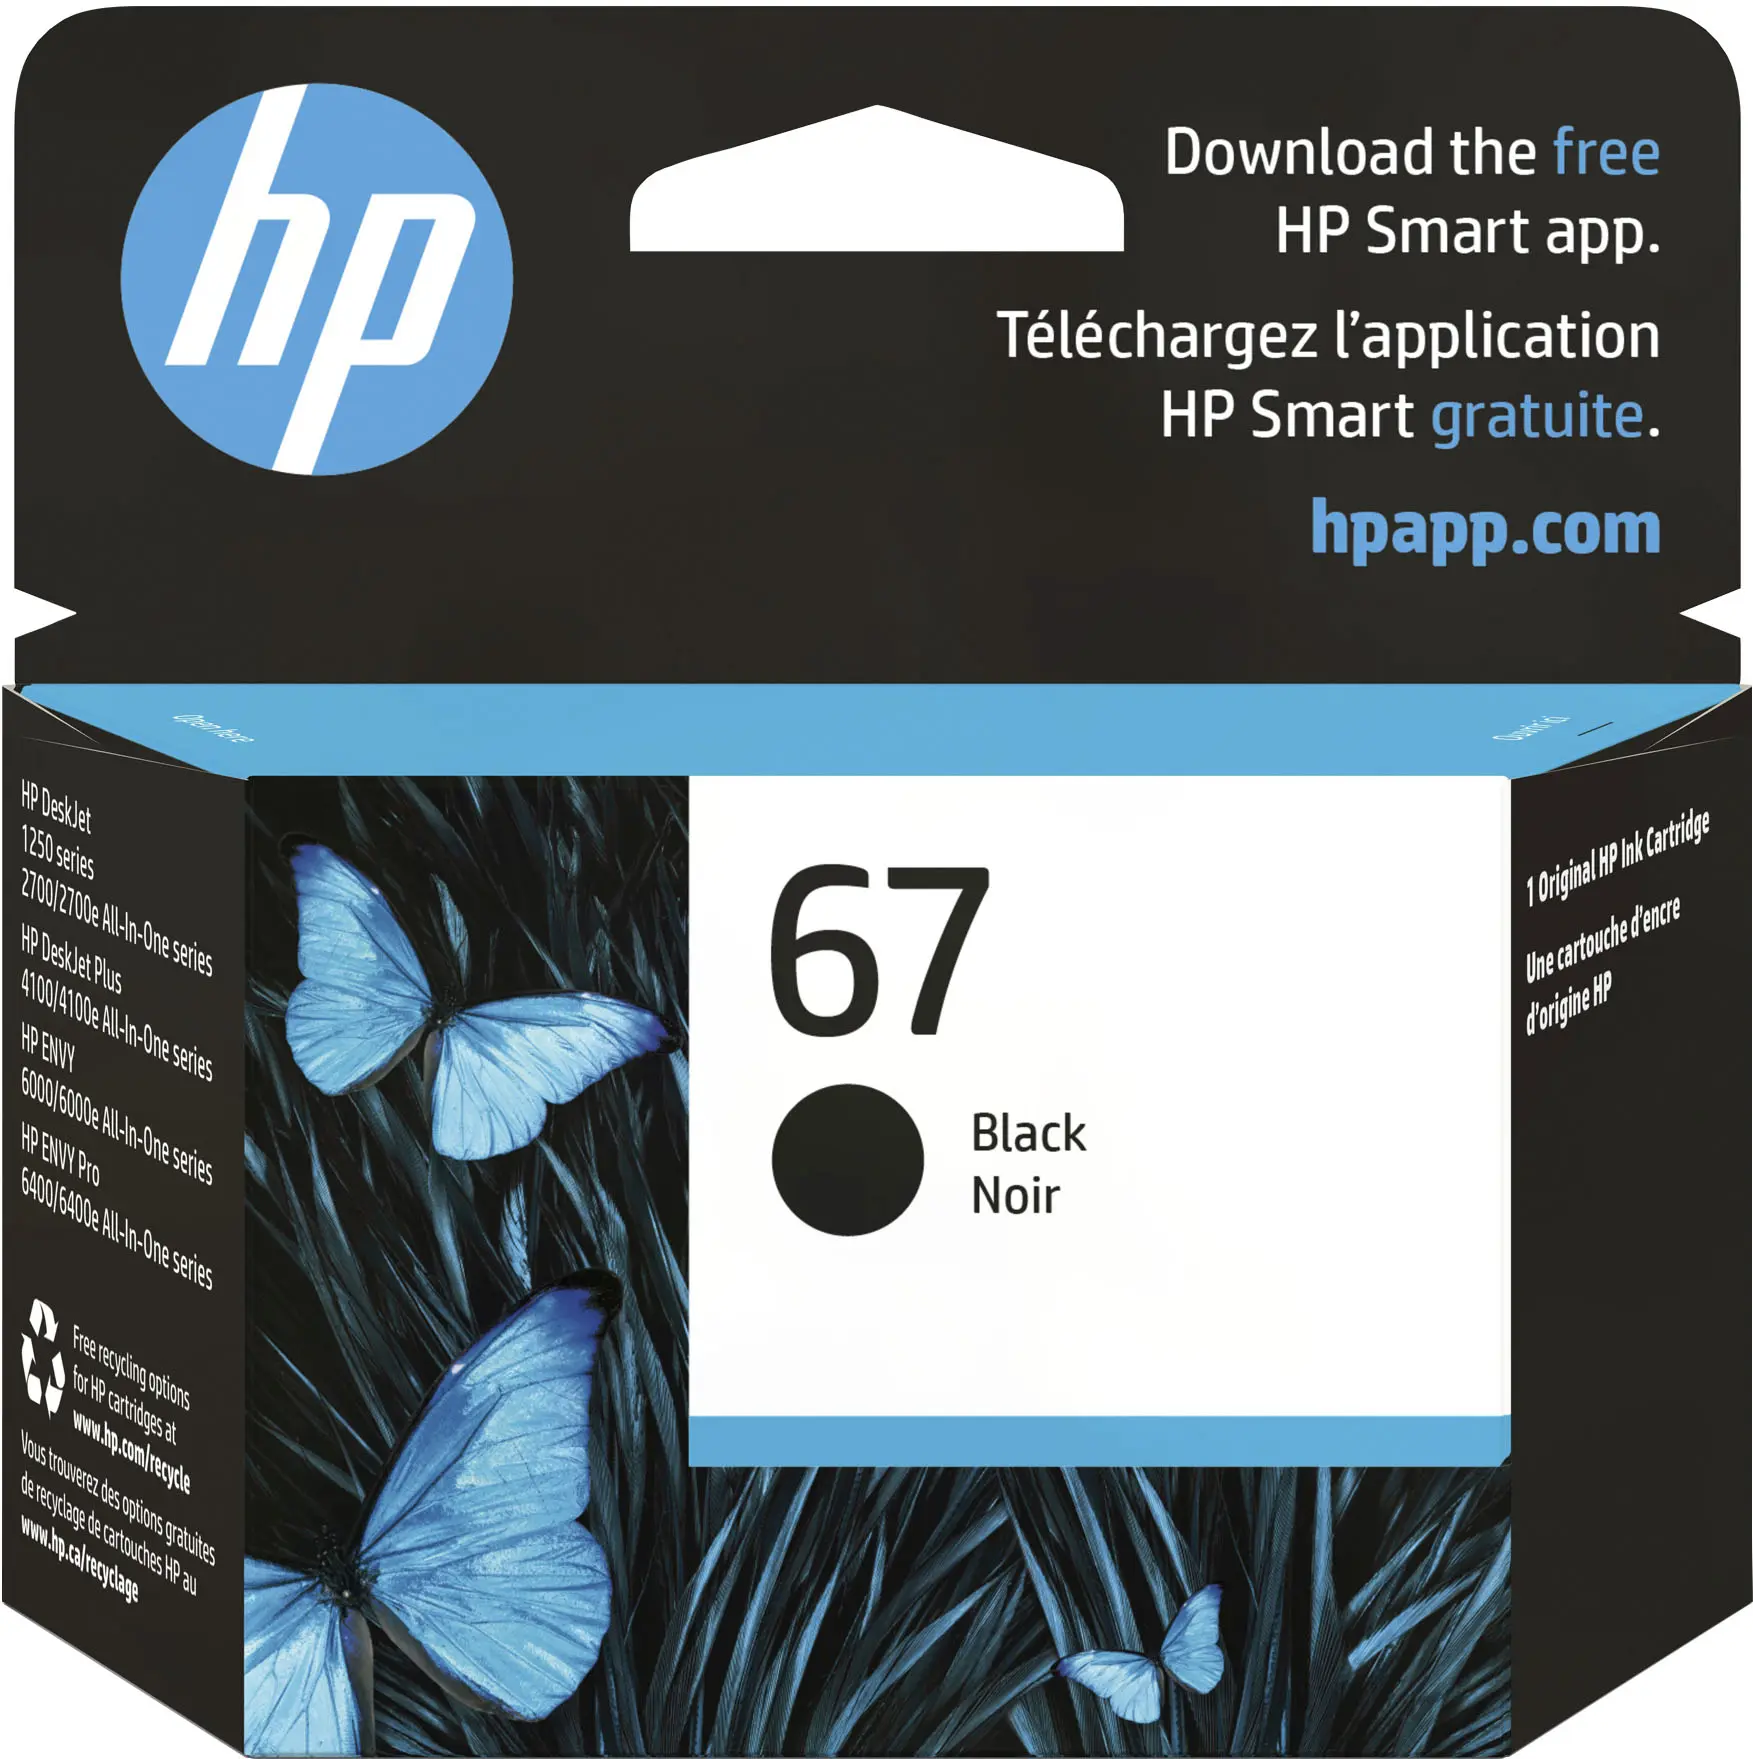 discounted hewlett packard ink - How can I save money on my HP printer ink